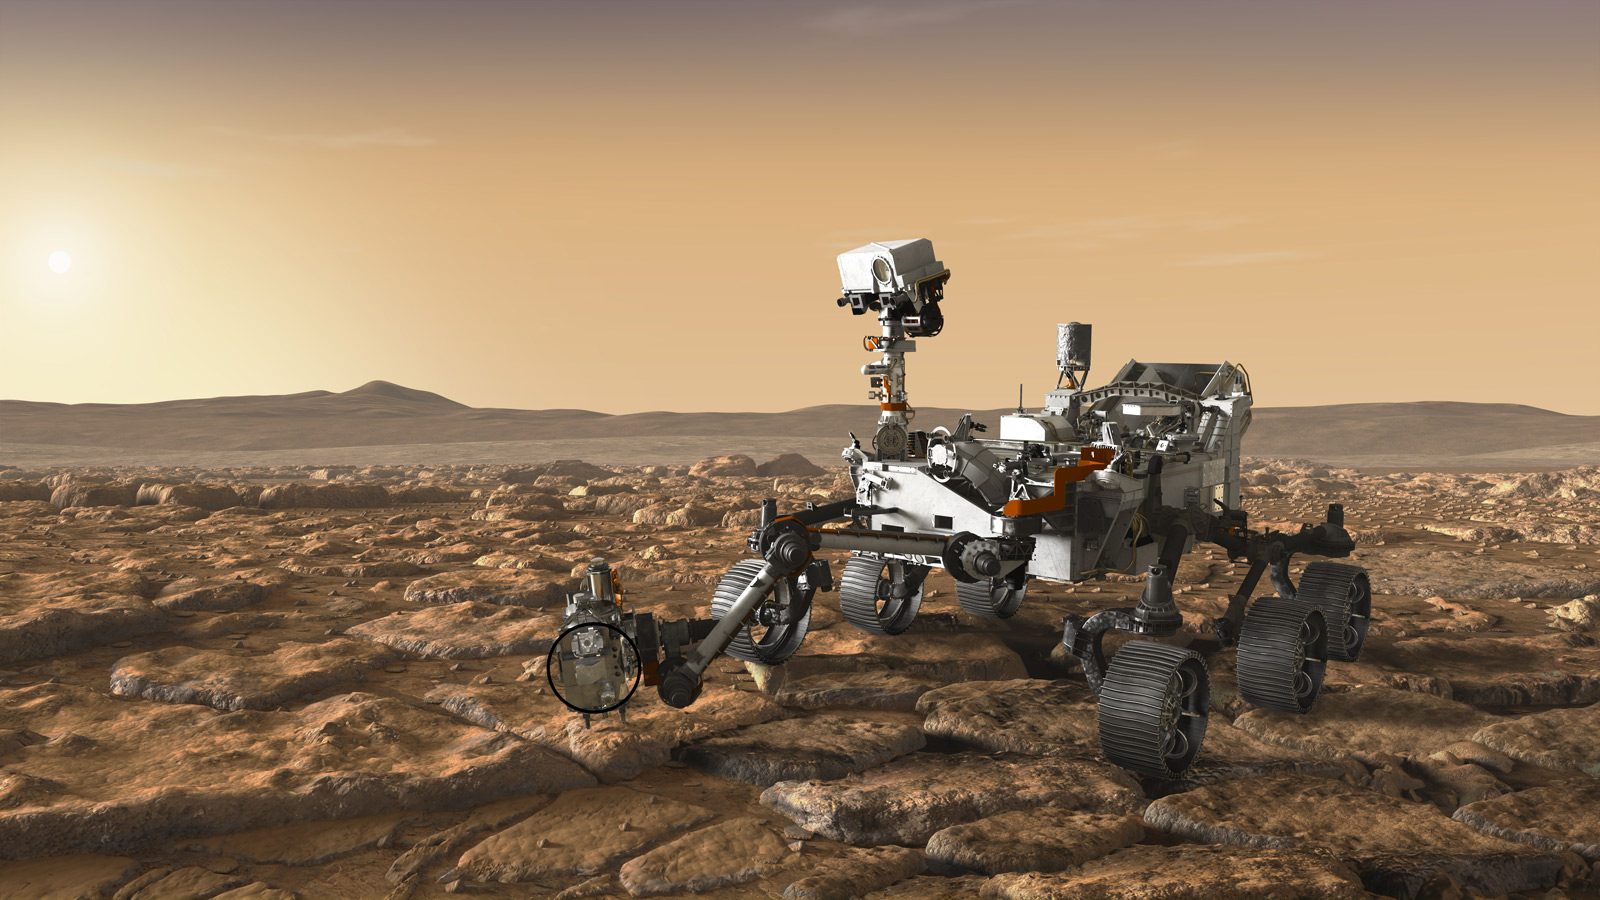 As seen in this artist's concept, the SHERLOC instrument is located on the end of the robotic arm